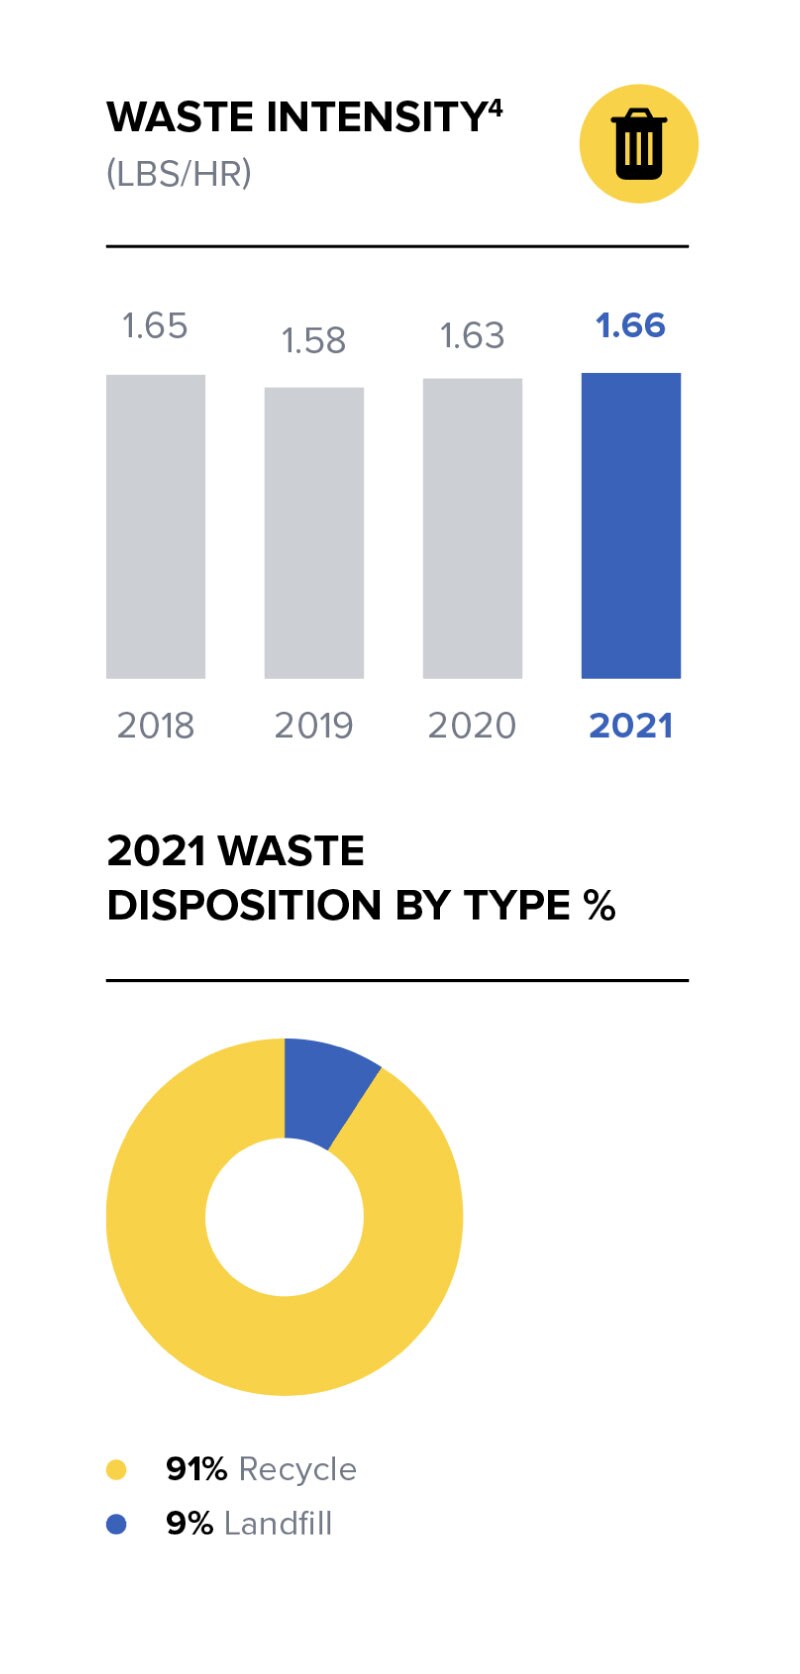 Graph of waste intensity and 2021 waste disposition by type percentage